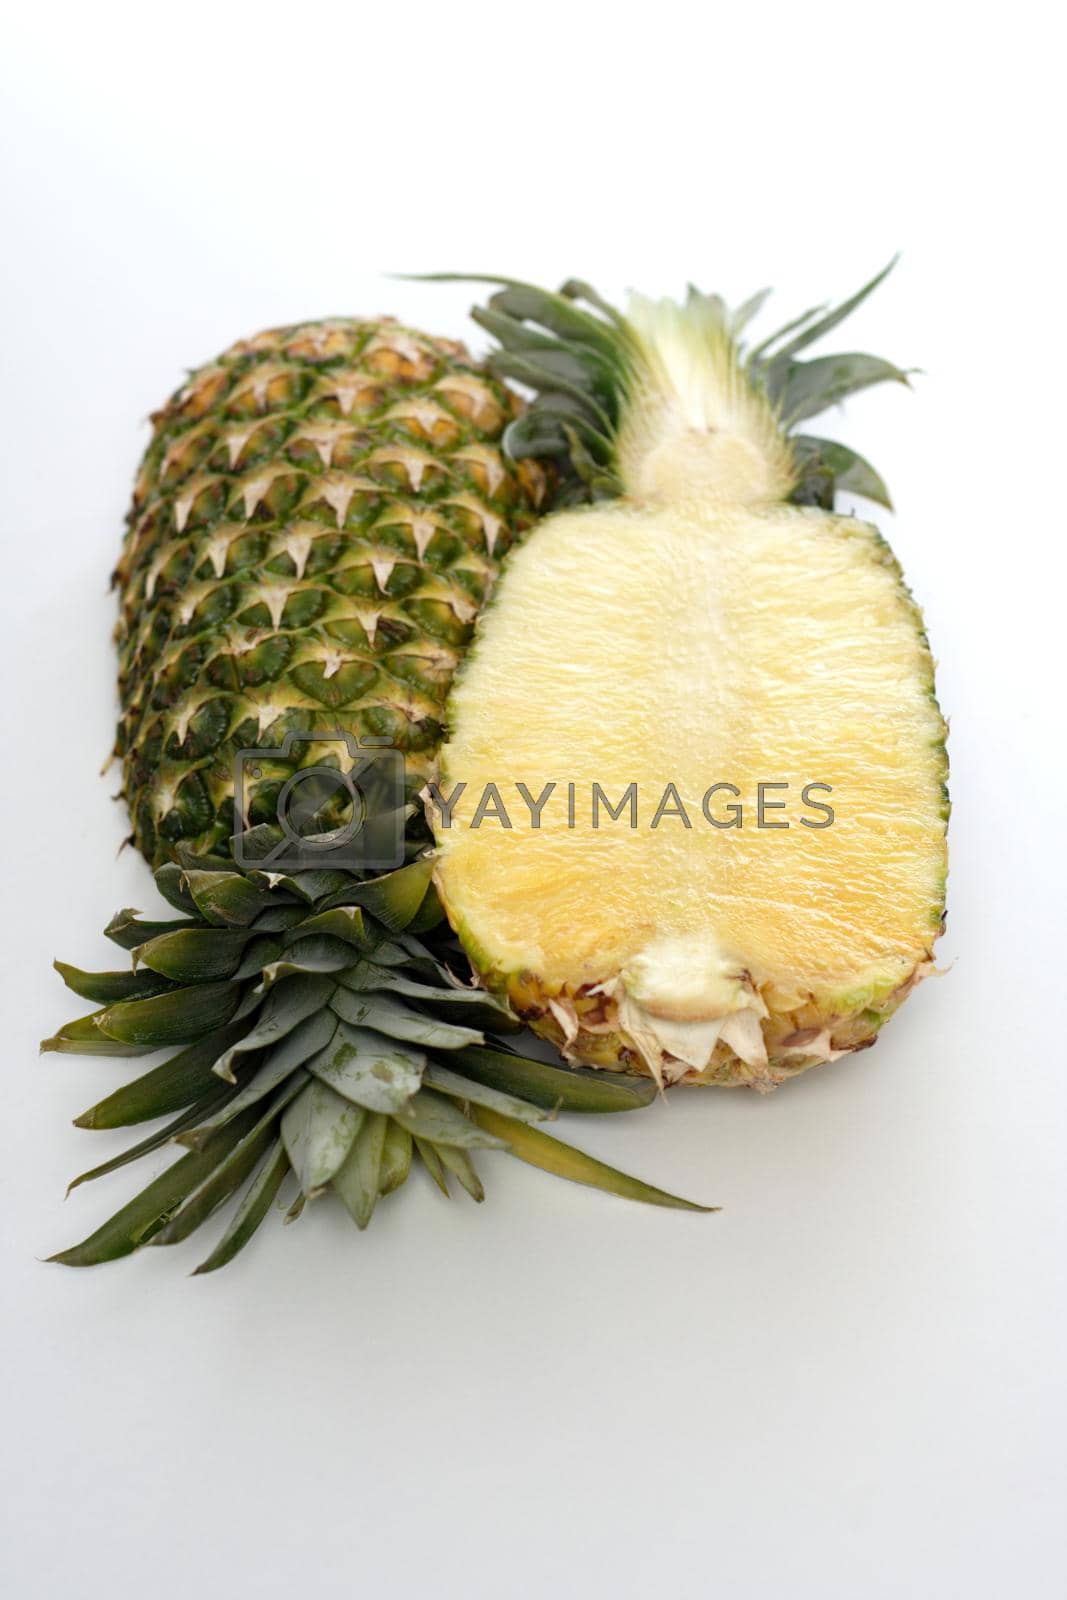 Royalty free image of Pineapple by moodboard